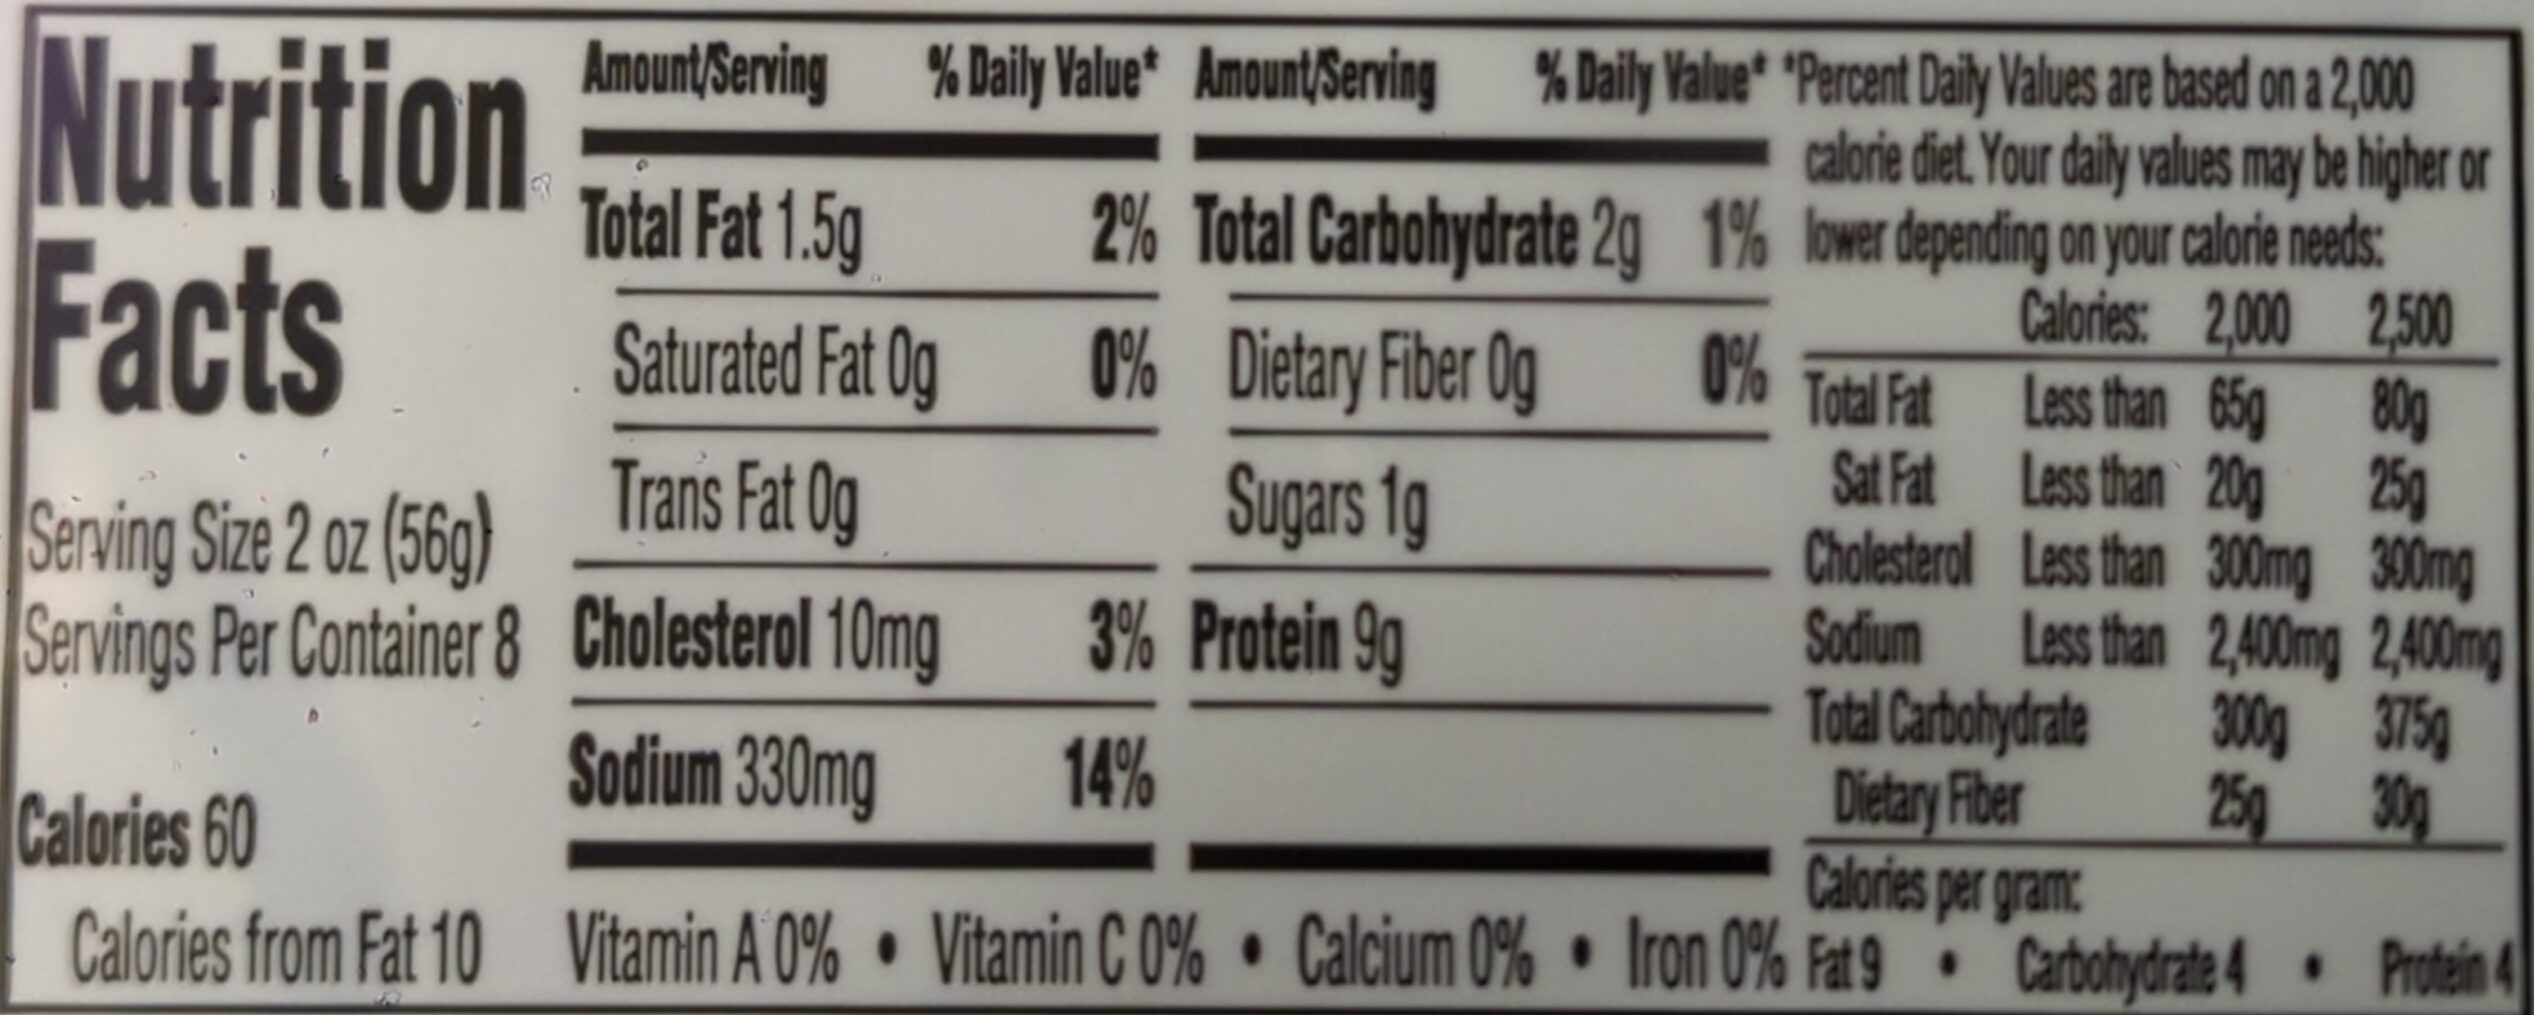 Ultra thin deli slices lower sodium oven roasted turkey breast - Nutrition facts